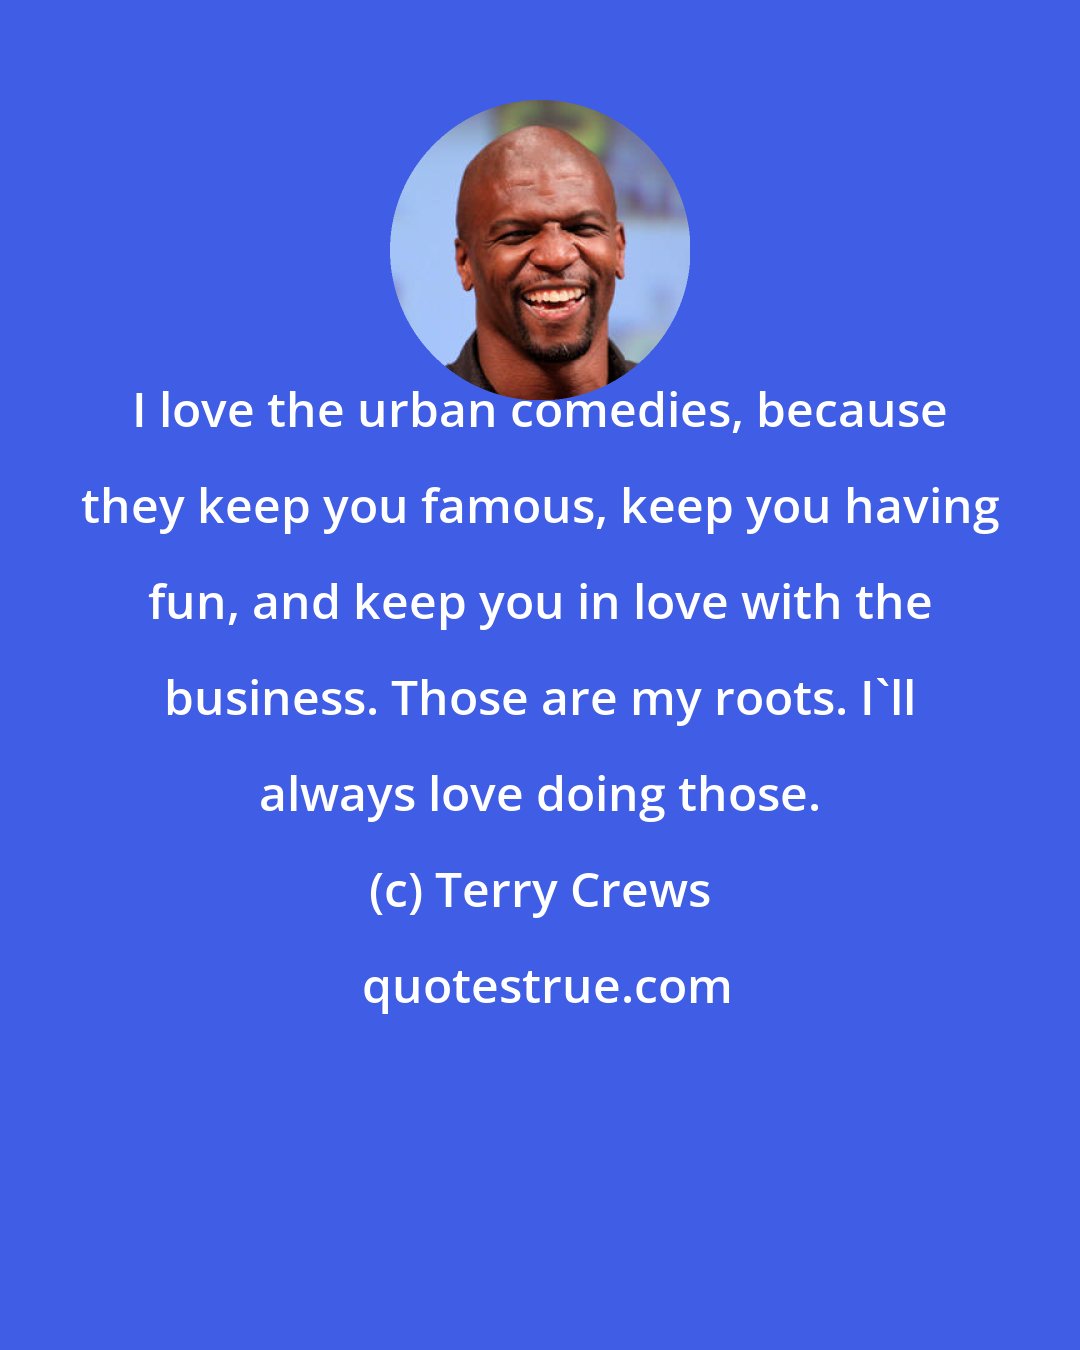 Terry Crews: I love the urban comedies, because they keep you famous, keep you having fun, and keep you in love with the business. Those are my roots. I'll always love doing those.